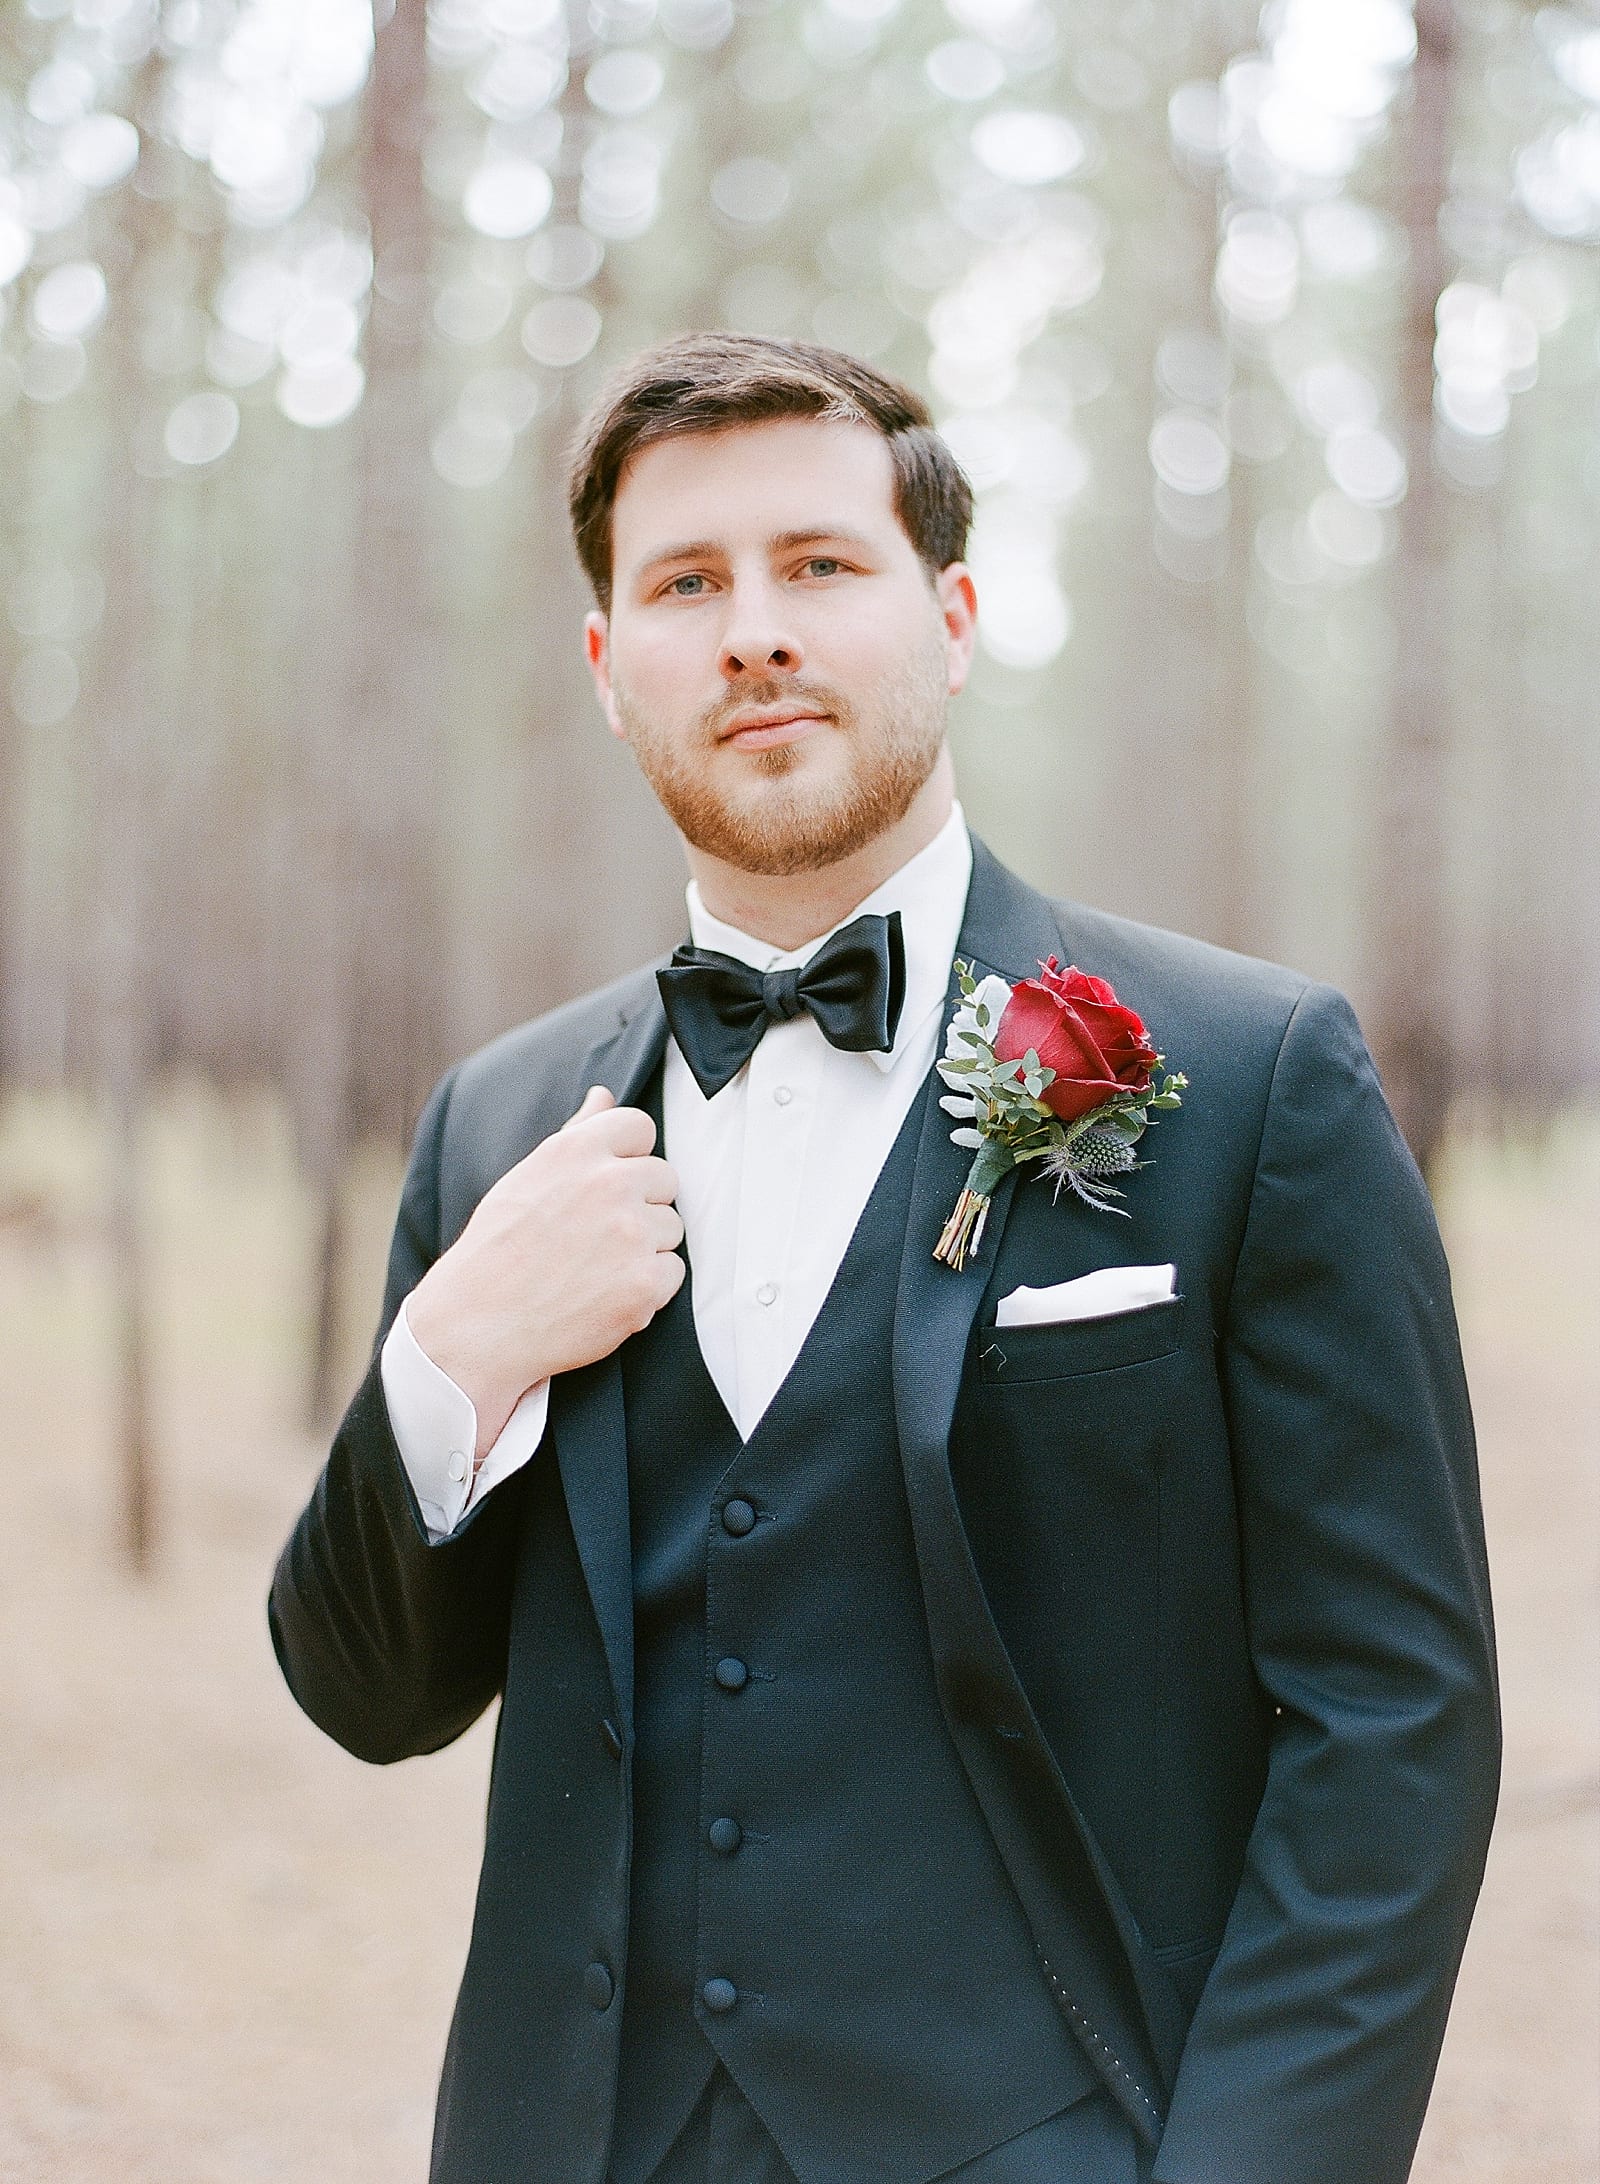 Groom Holding Jacket Portrait Looking at Camera Photo